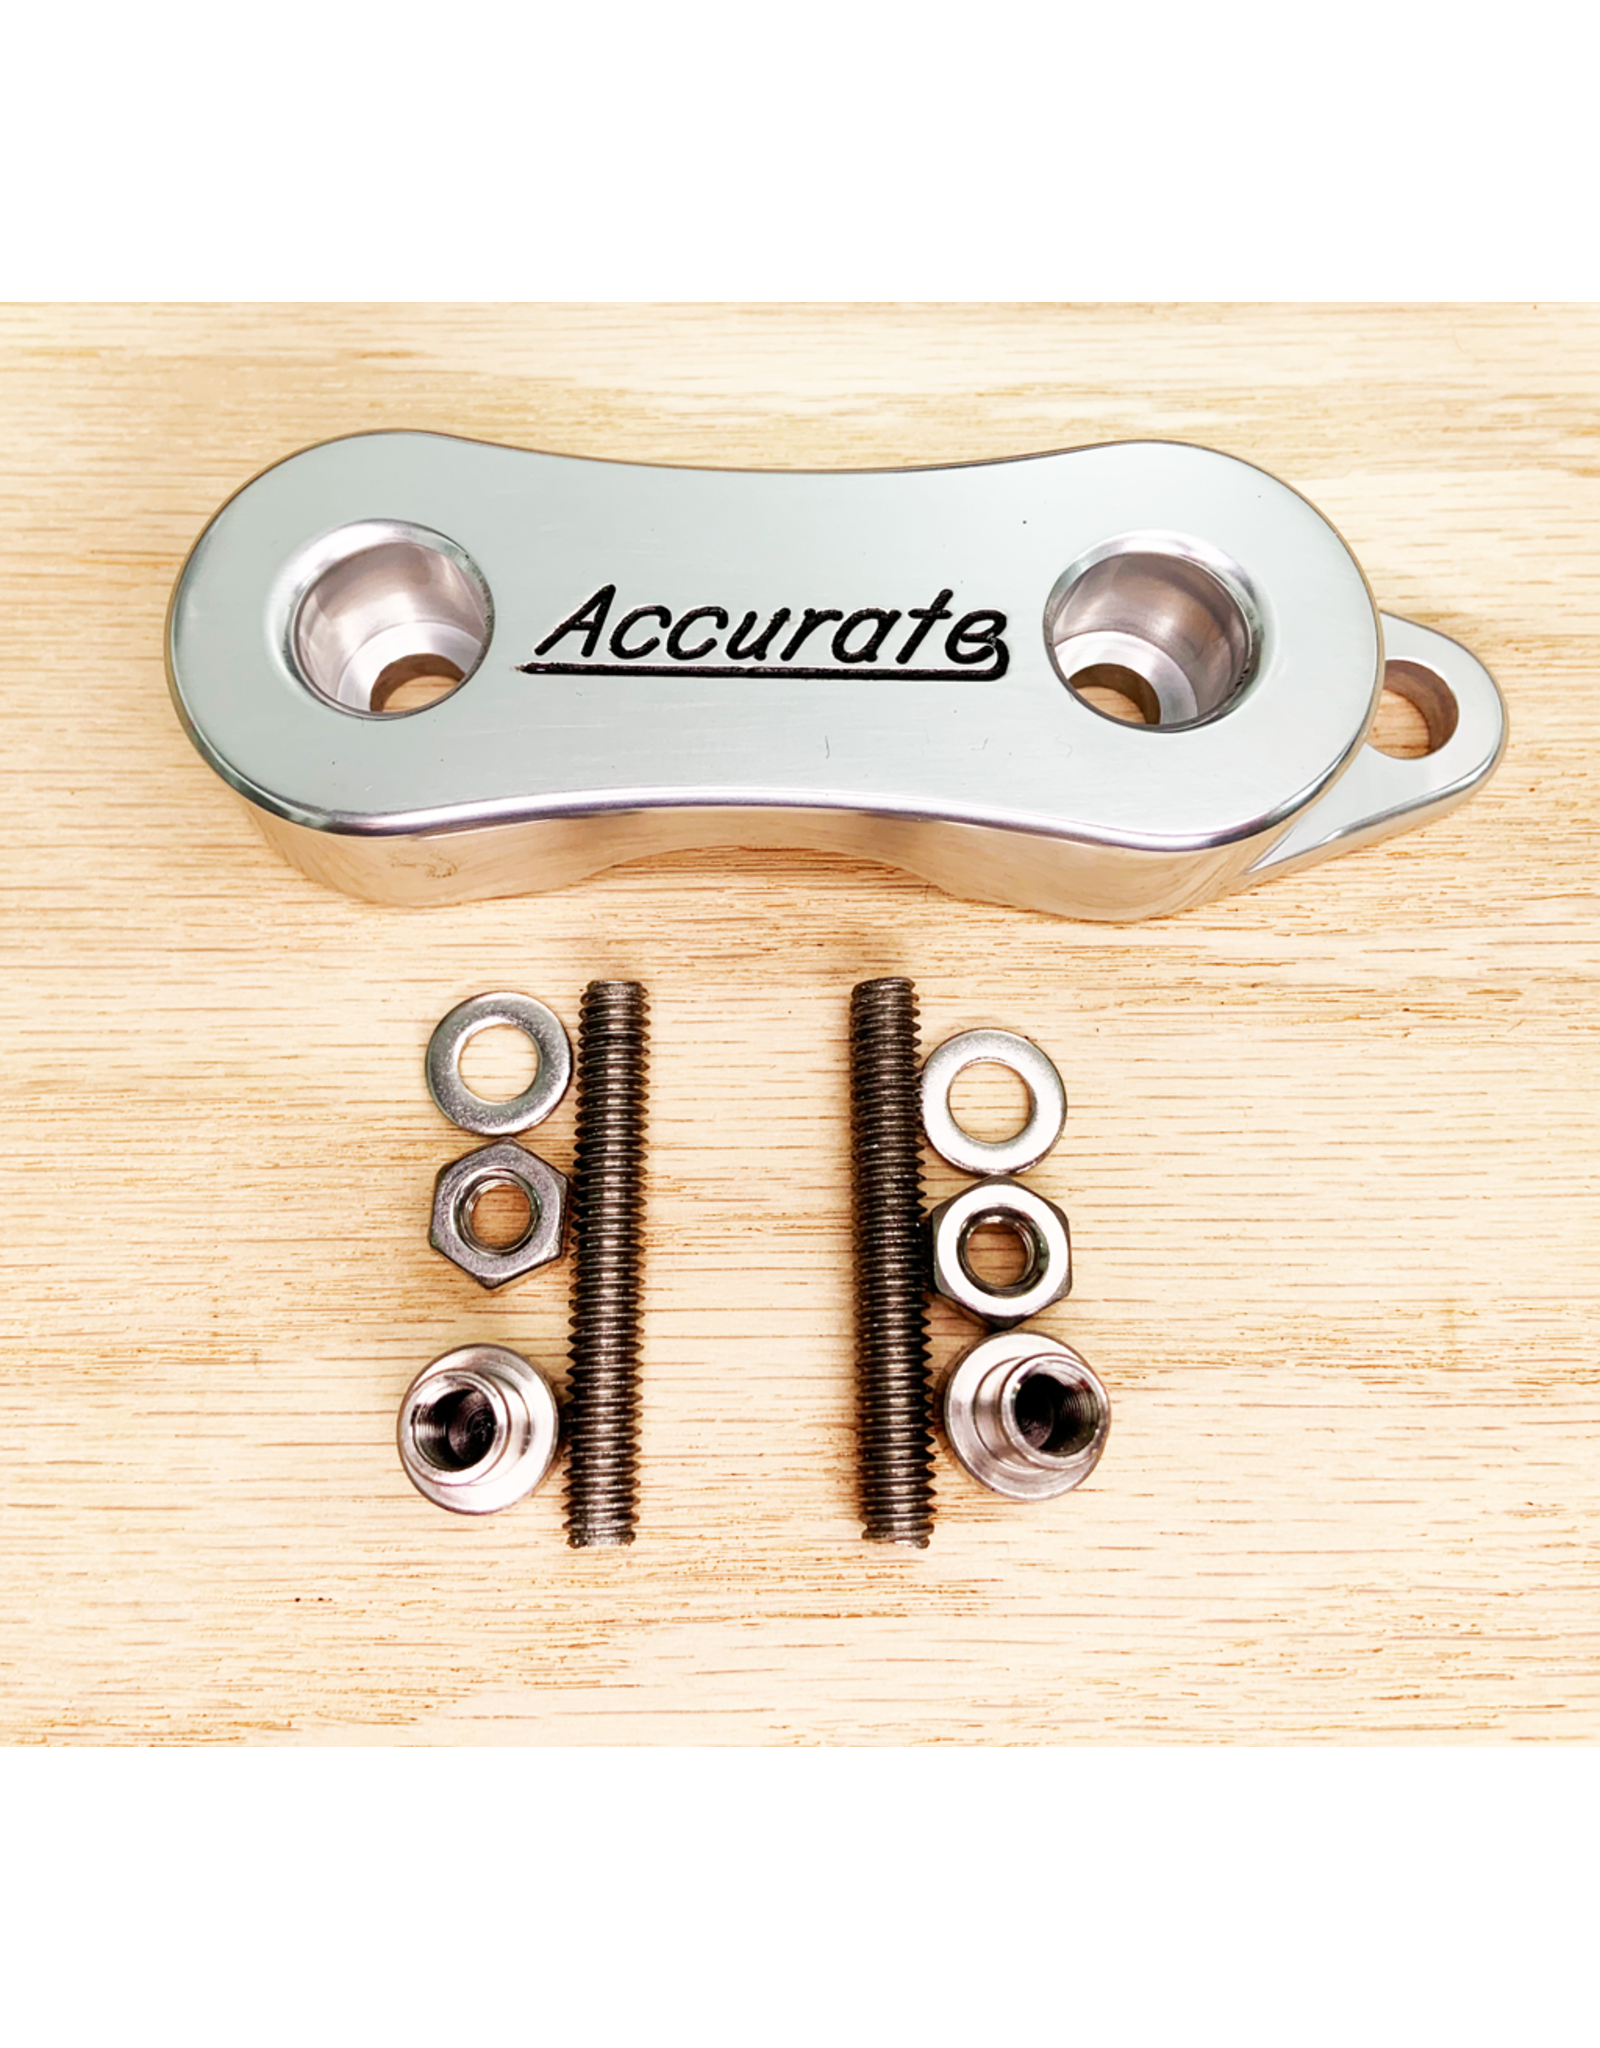 Accurate ATD 80,130 CLAMP KIT